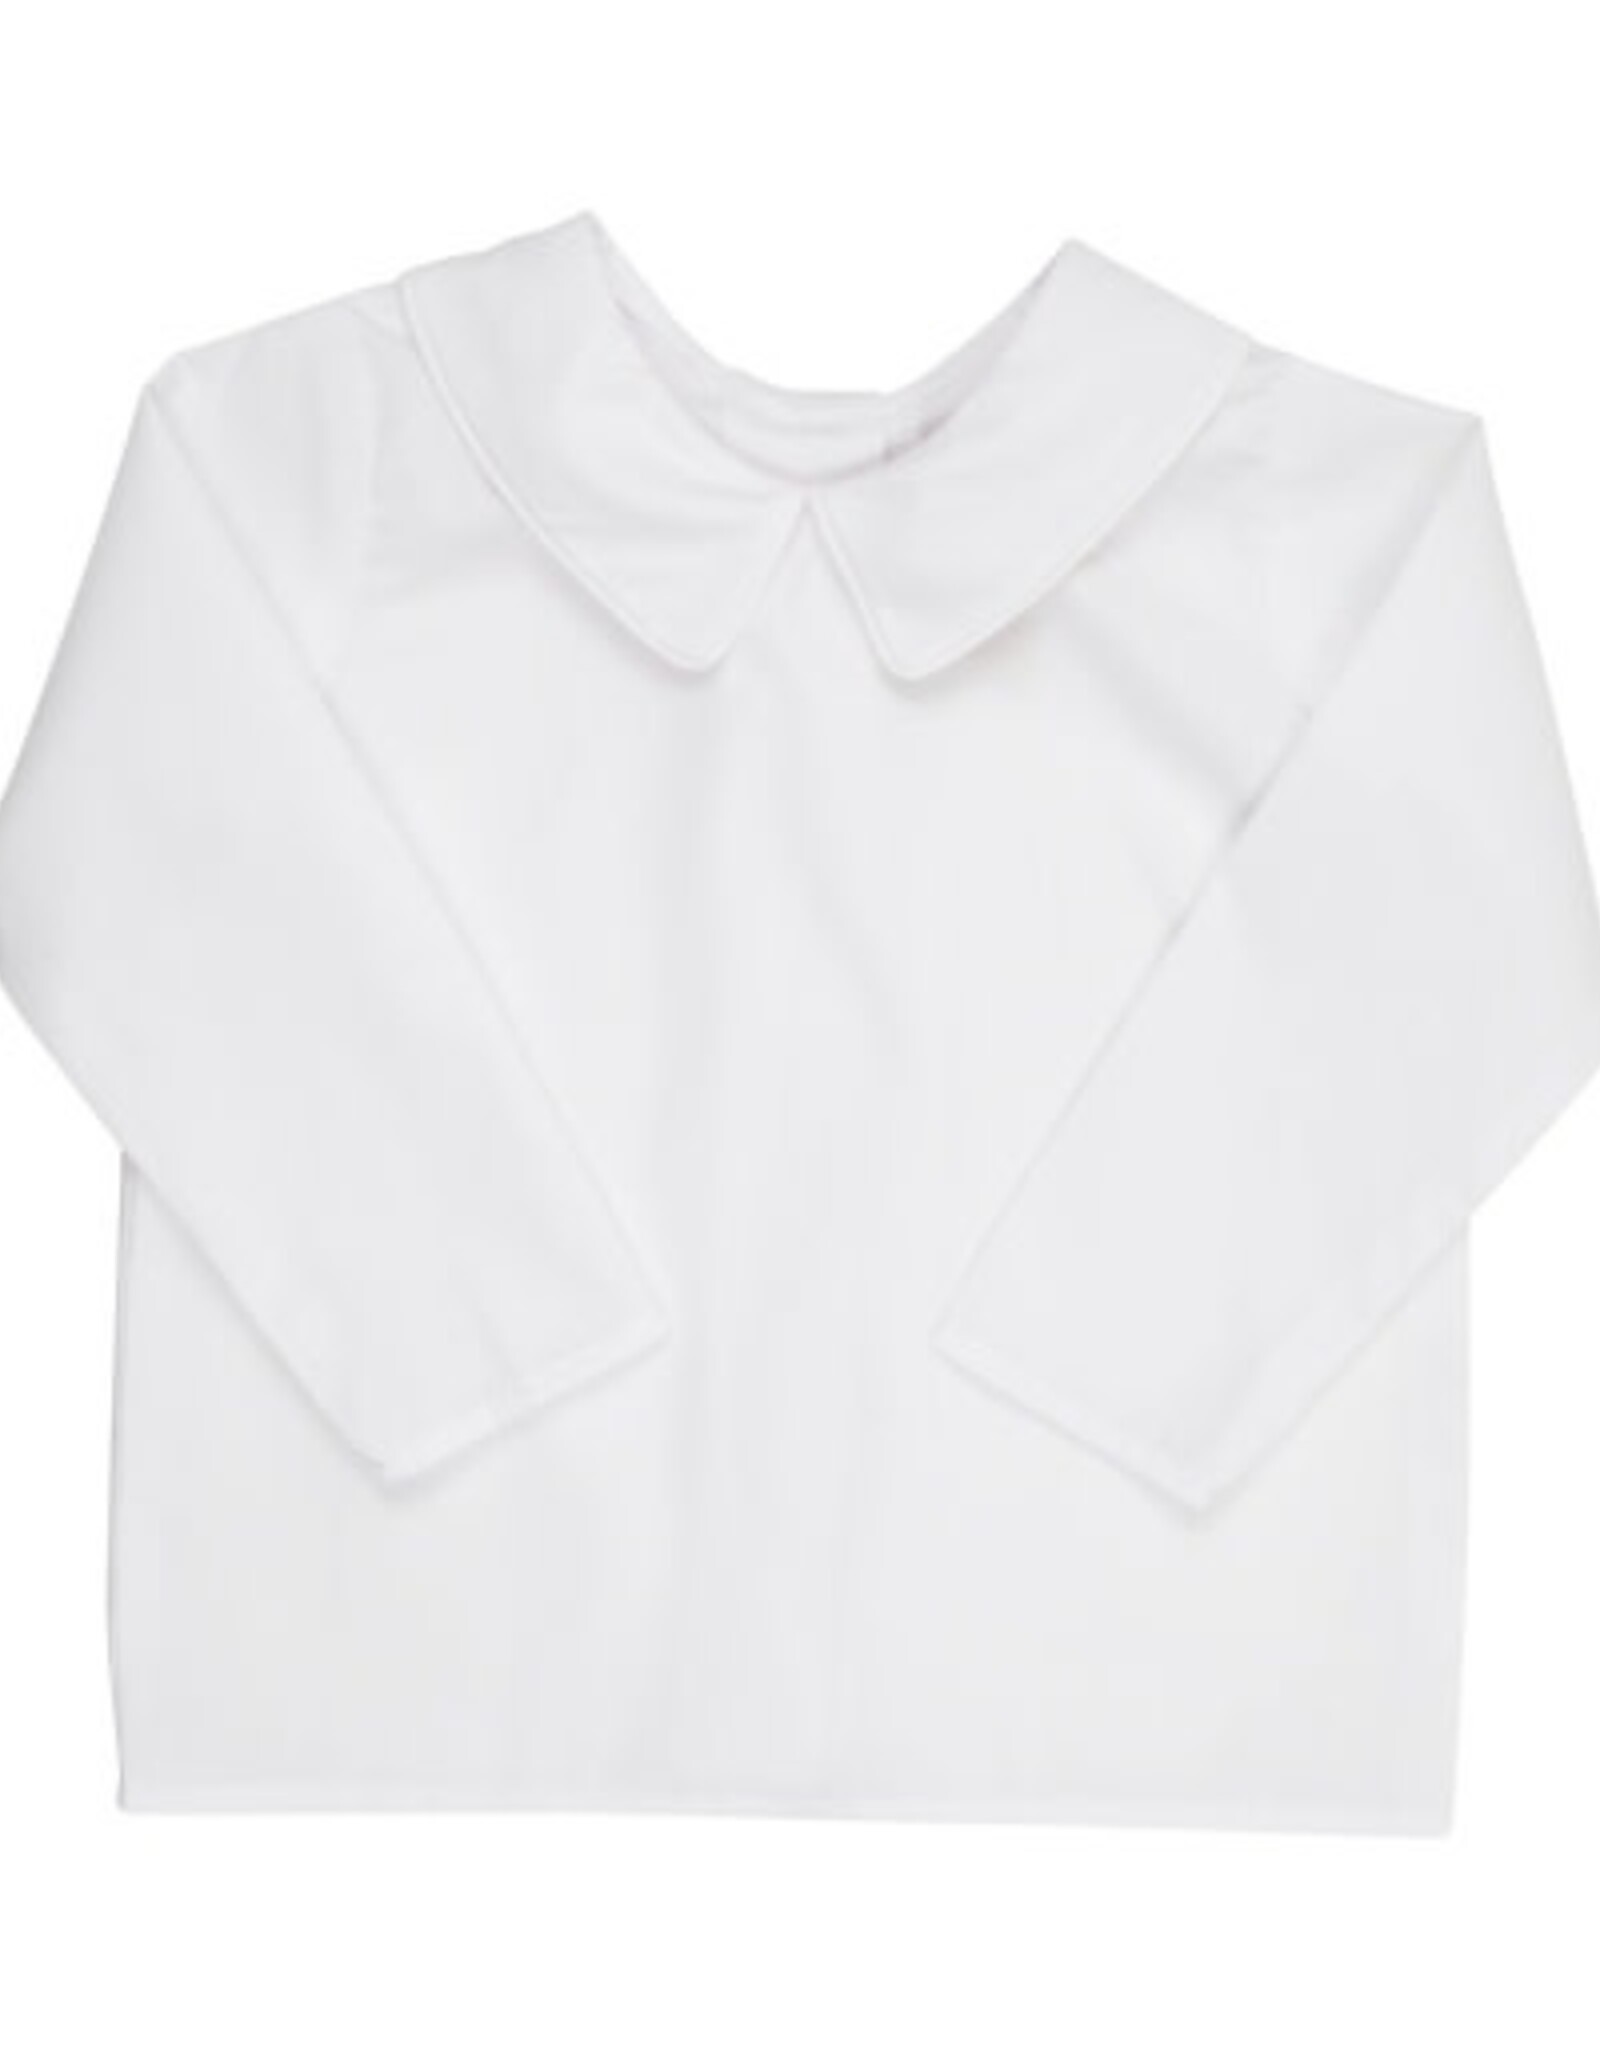 The Beaufort Bonnet Company Peter Pan Woven LS Shirt, Worth Ave White